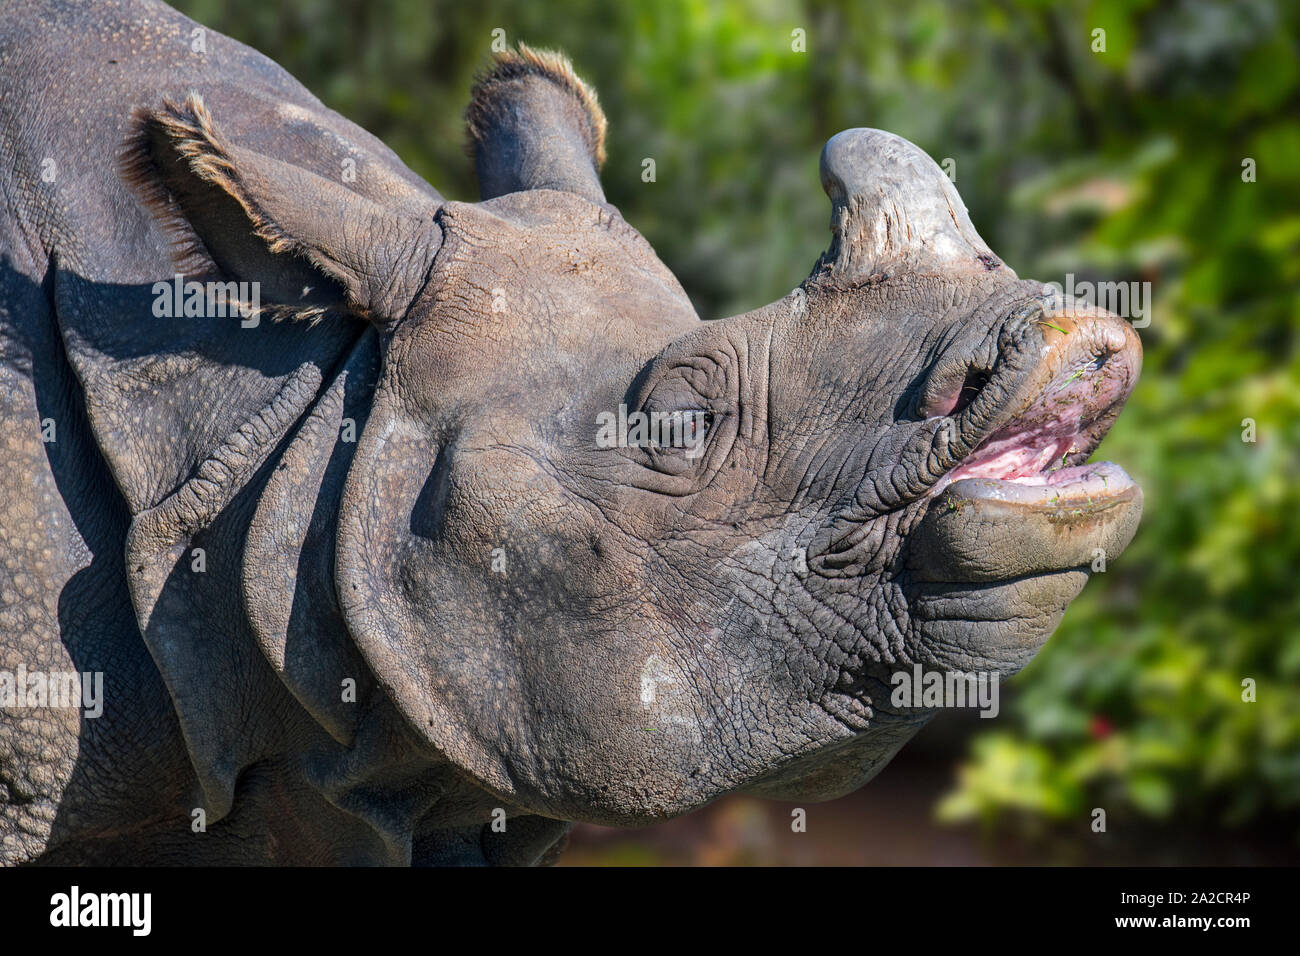 Indian rhinoceros / greater one-horned rhinoceros / great Indian rhinoceros (Rhinoceros unicornis) close-up of head and horn Stock Photo